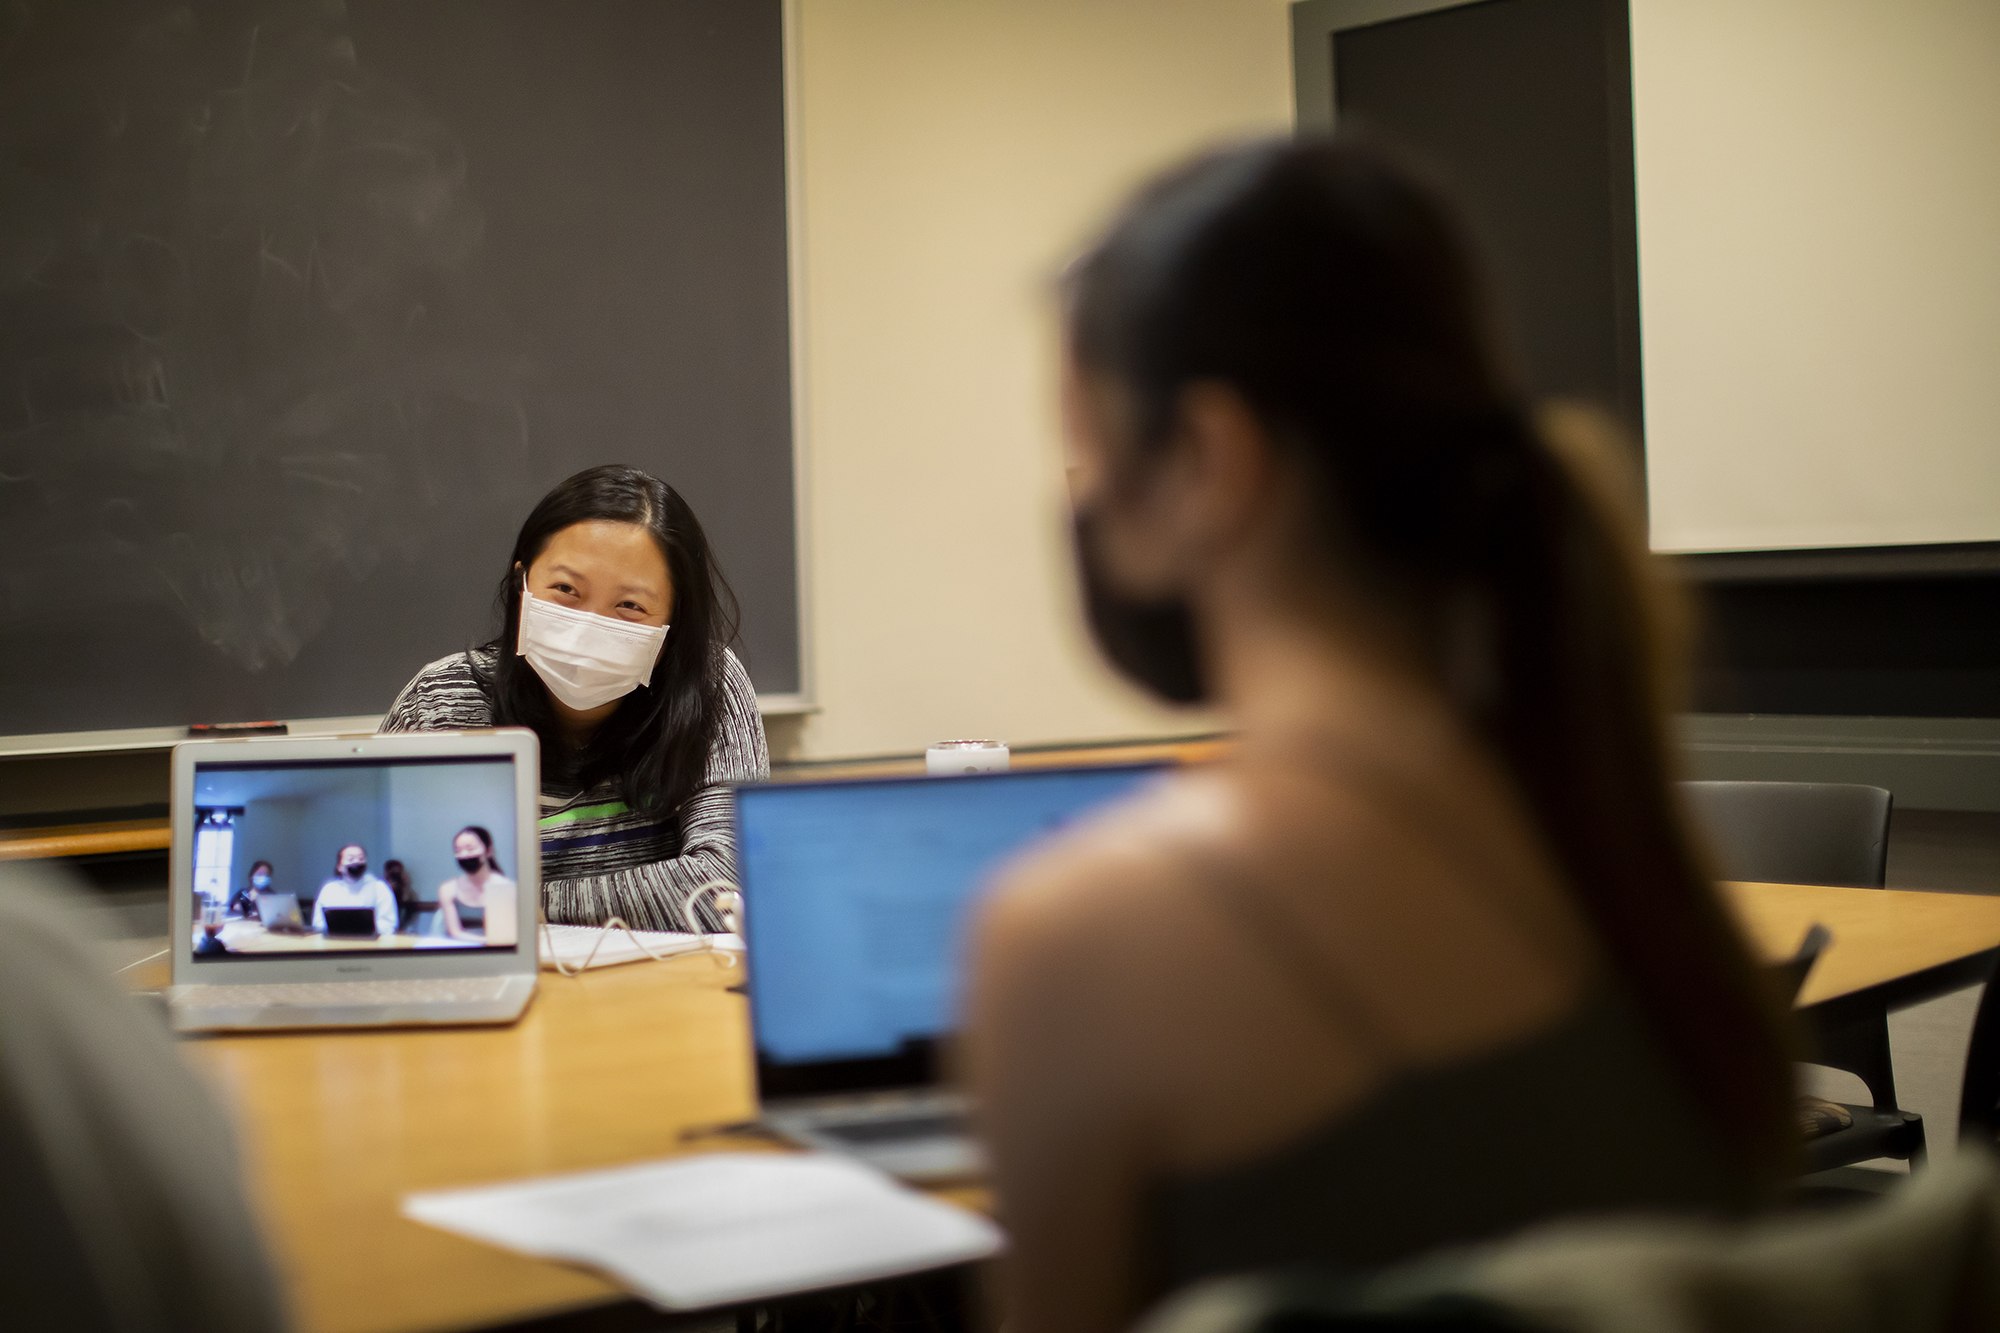 PhD candidate Sarah Yu’s class transformed students into tour guides and podcasters while learning about Chinese diasporas